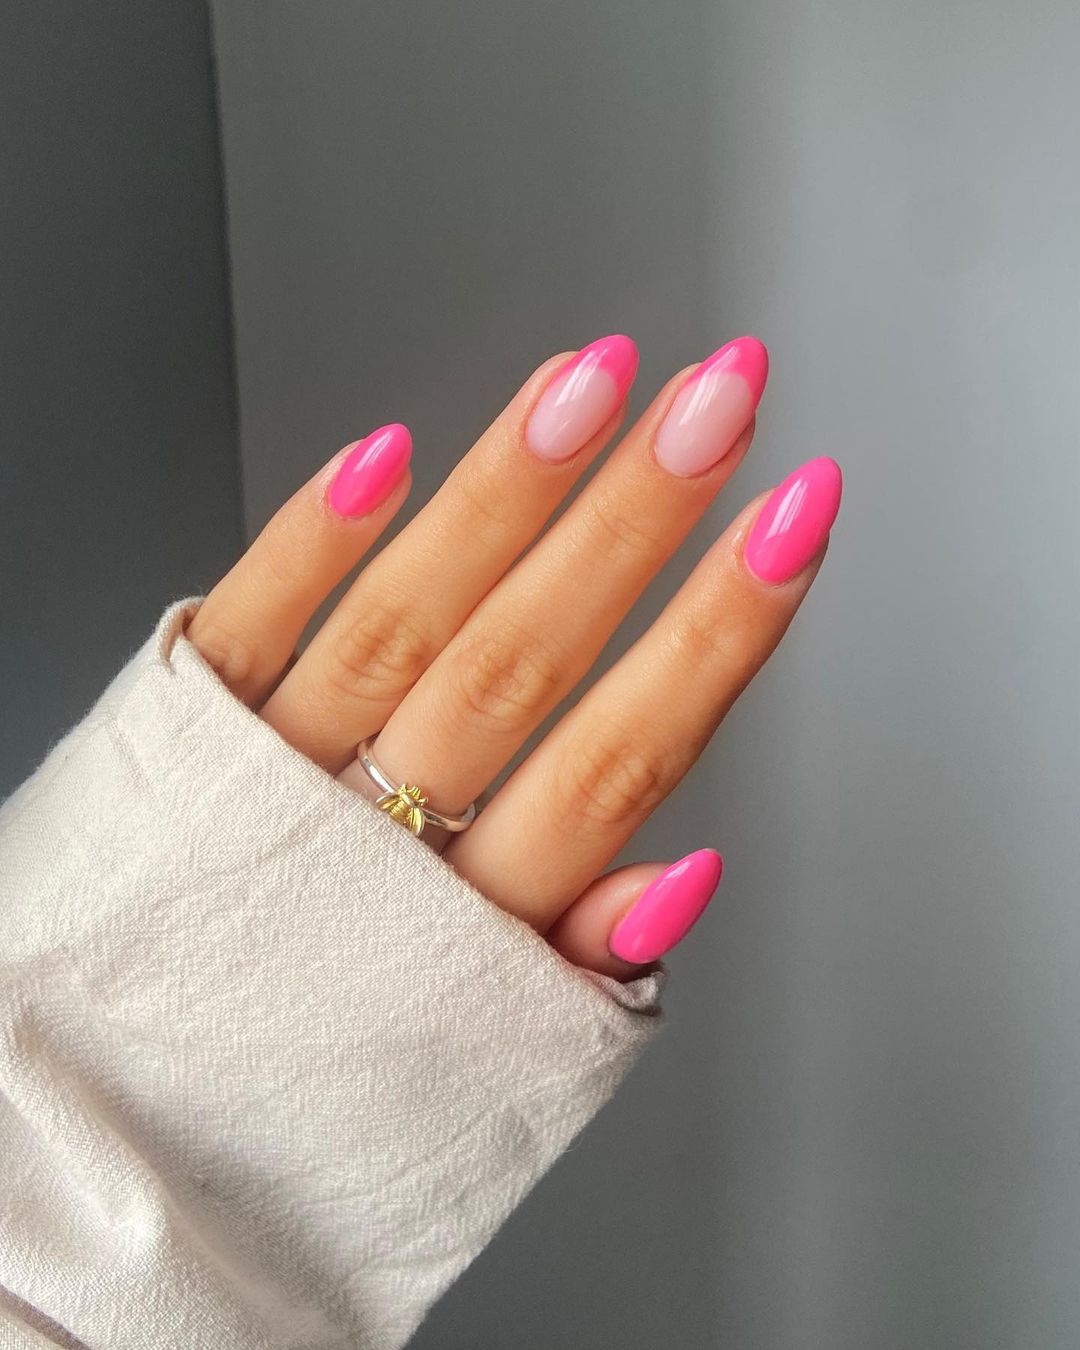 Why Ladies Love Extra Long Nails, by Martins Ifeyinwa - New Telegraph